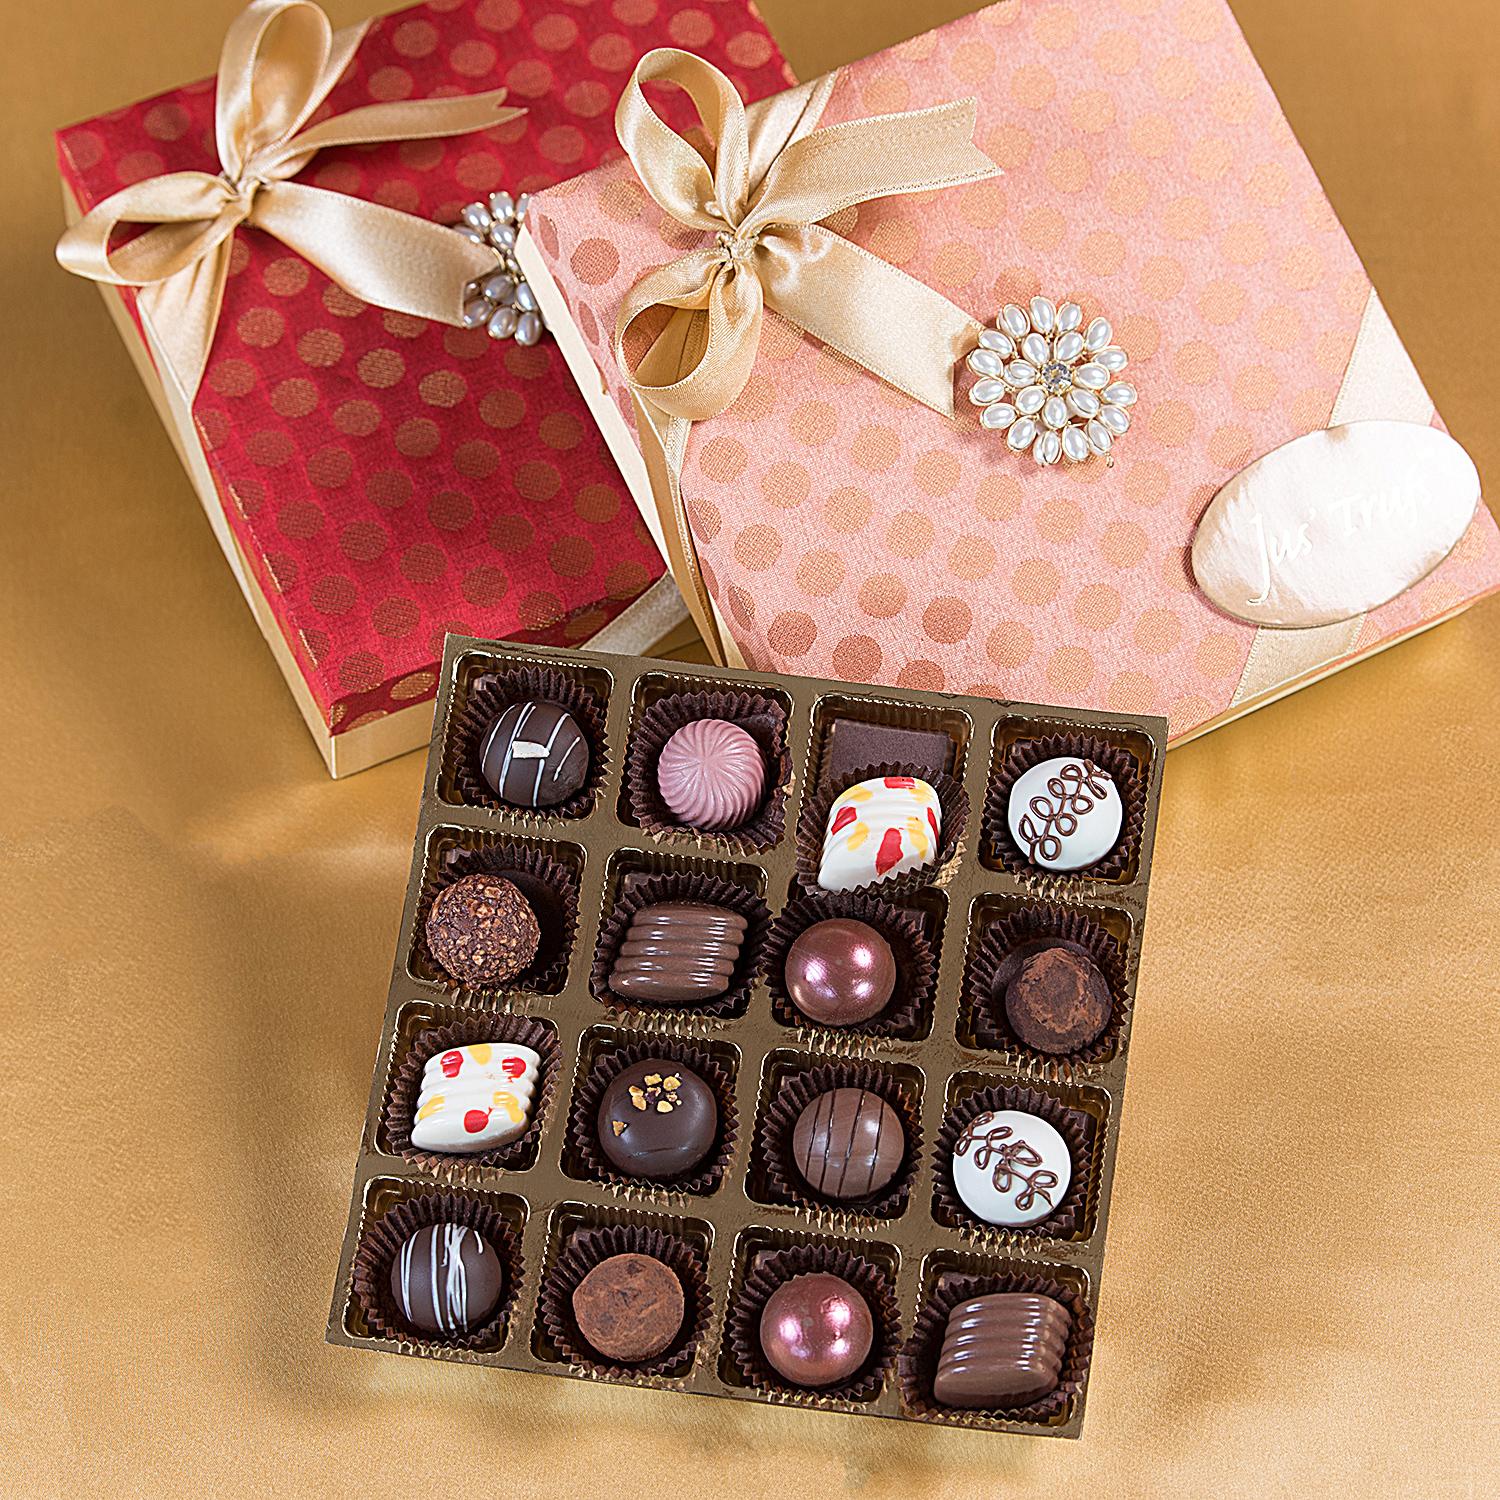 Luxury Chocolate Hampers Guide - A Gift For Each Occasion | Melt Chocolates